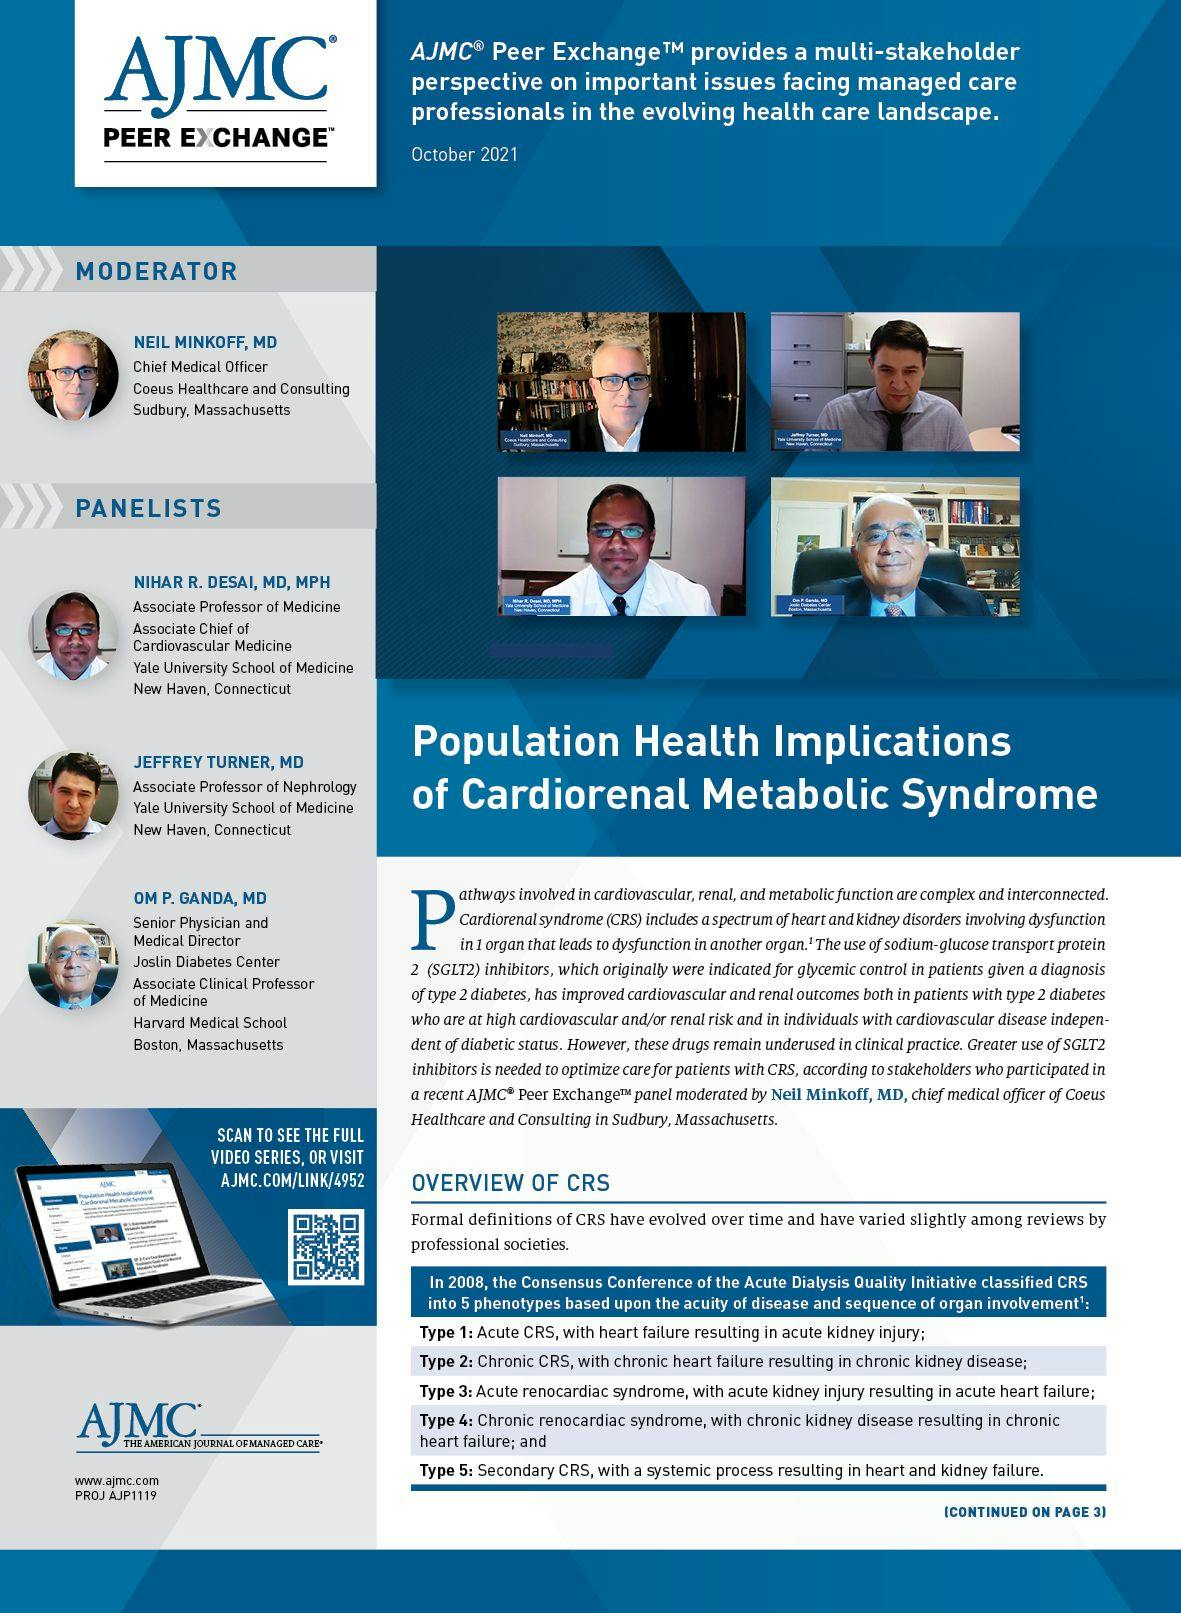 Population Health Implications of Cardiorenal Metabolic Syndrome